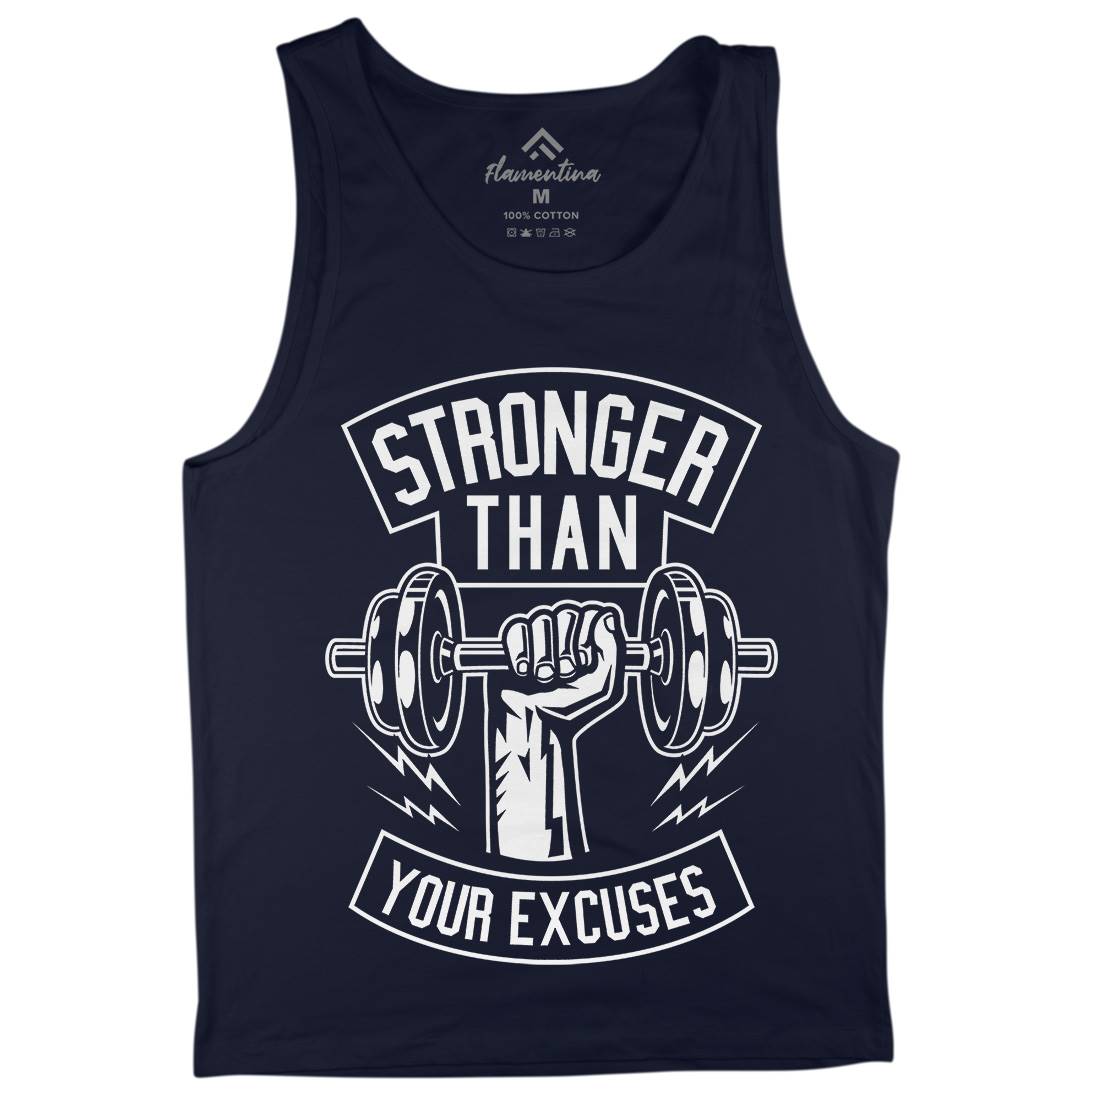 Stronger Than Your Excuses Mens Tank Top Vest Gym B644